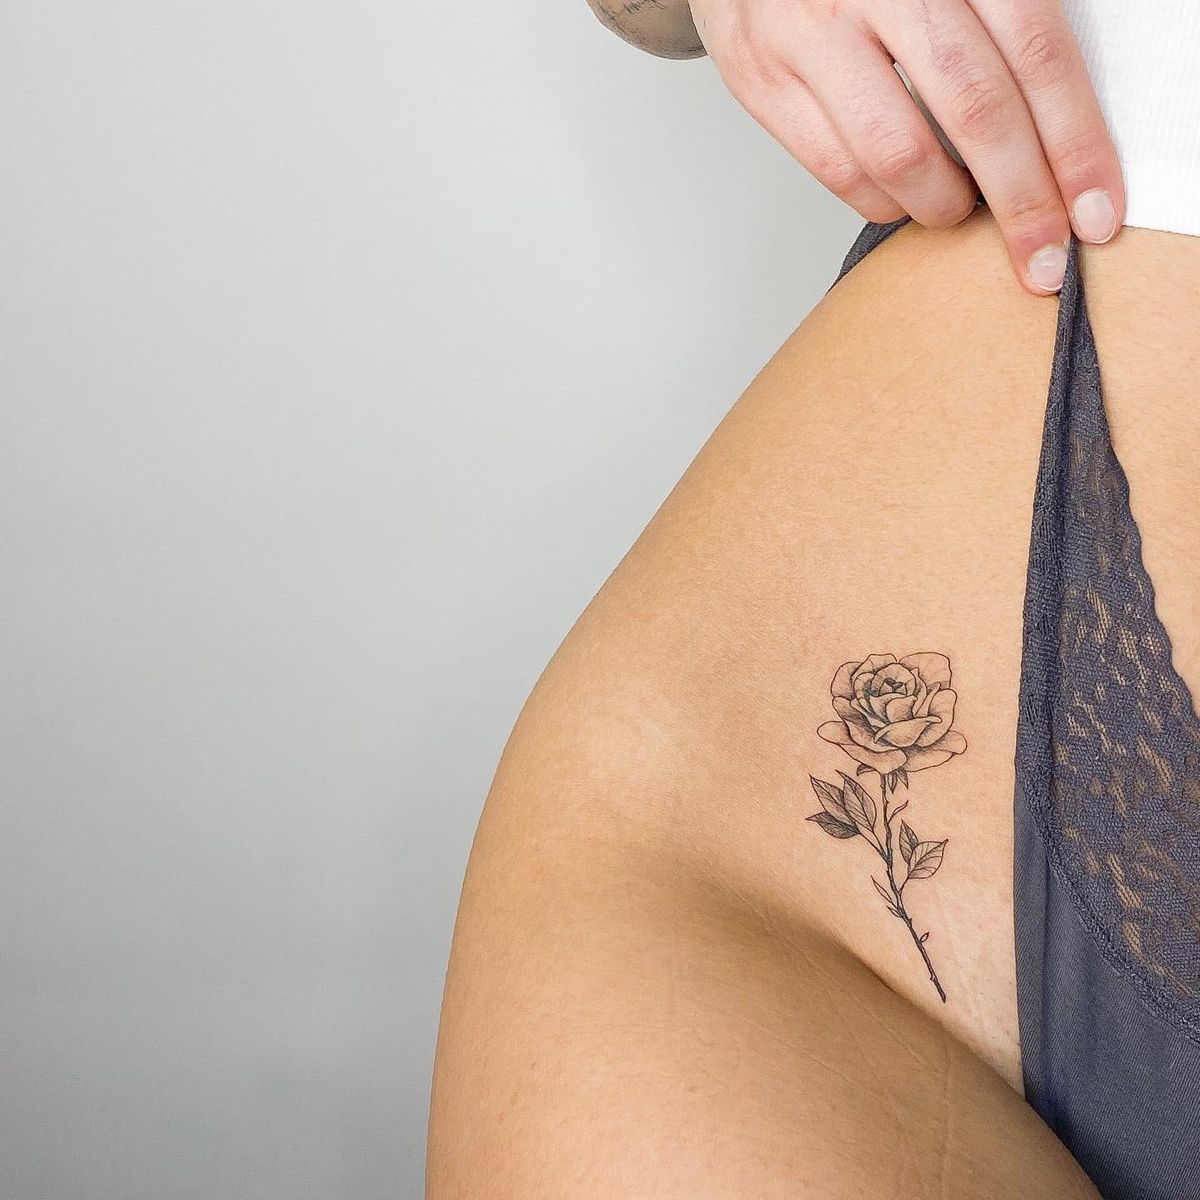 Make a Subtle Statement with Small Rose
Tattoos: Delicate and Chic